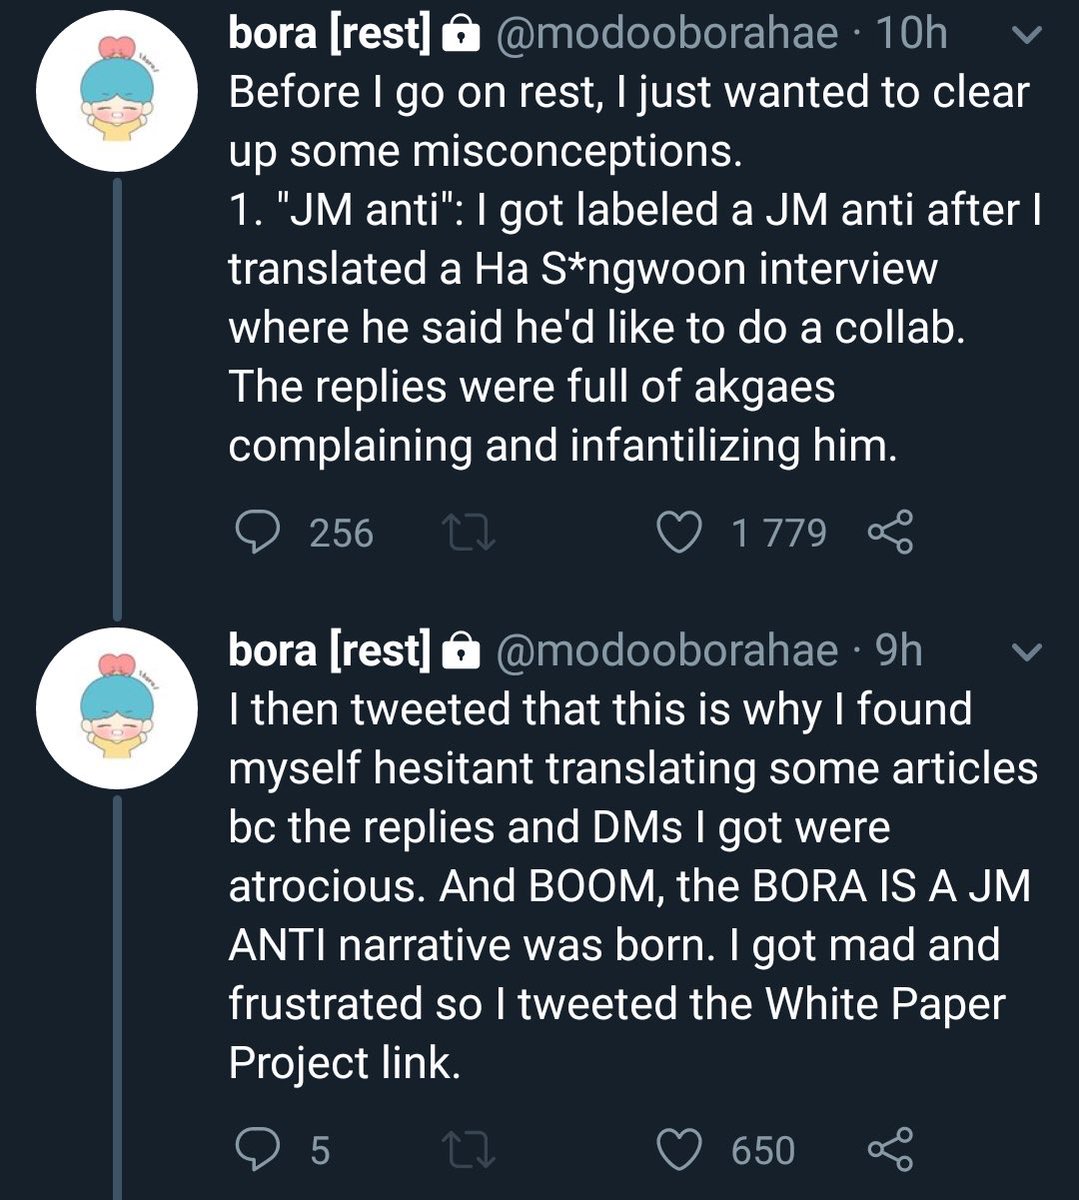 TW: de@th thre@ts When Bora got mad, she brought back the white paper project (which revolves around Nov 2018/the shirt issue) to “prove” she’s not a J/M anti. If he mattered to her more than her reputation she wouldn’t have done it at all. She should know that he received